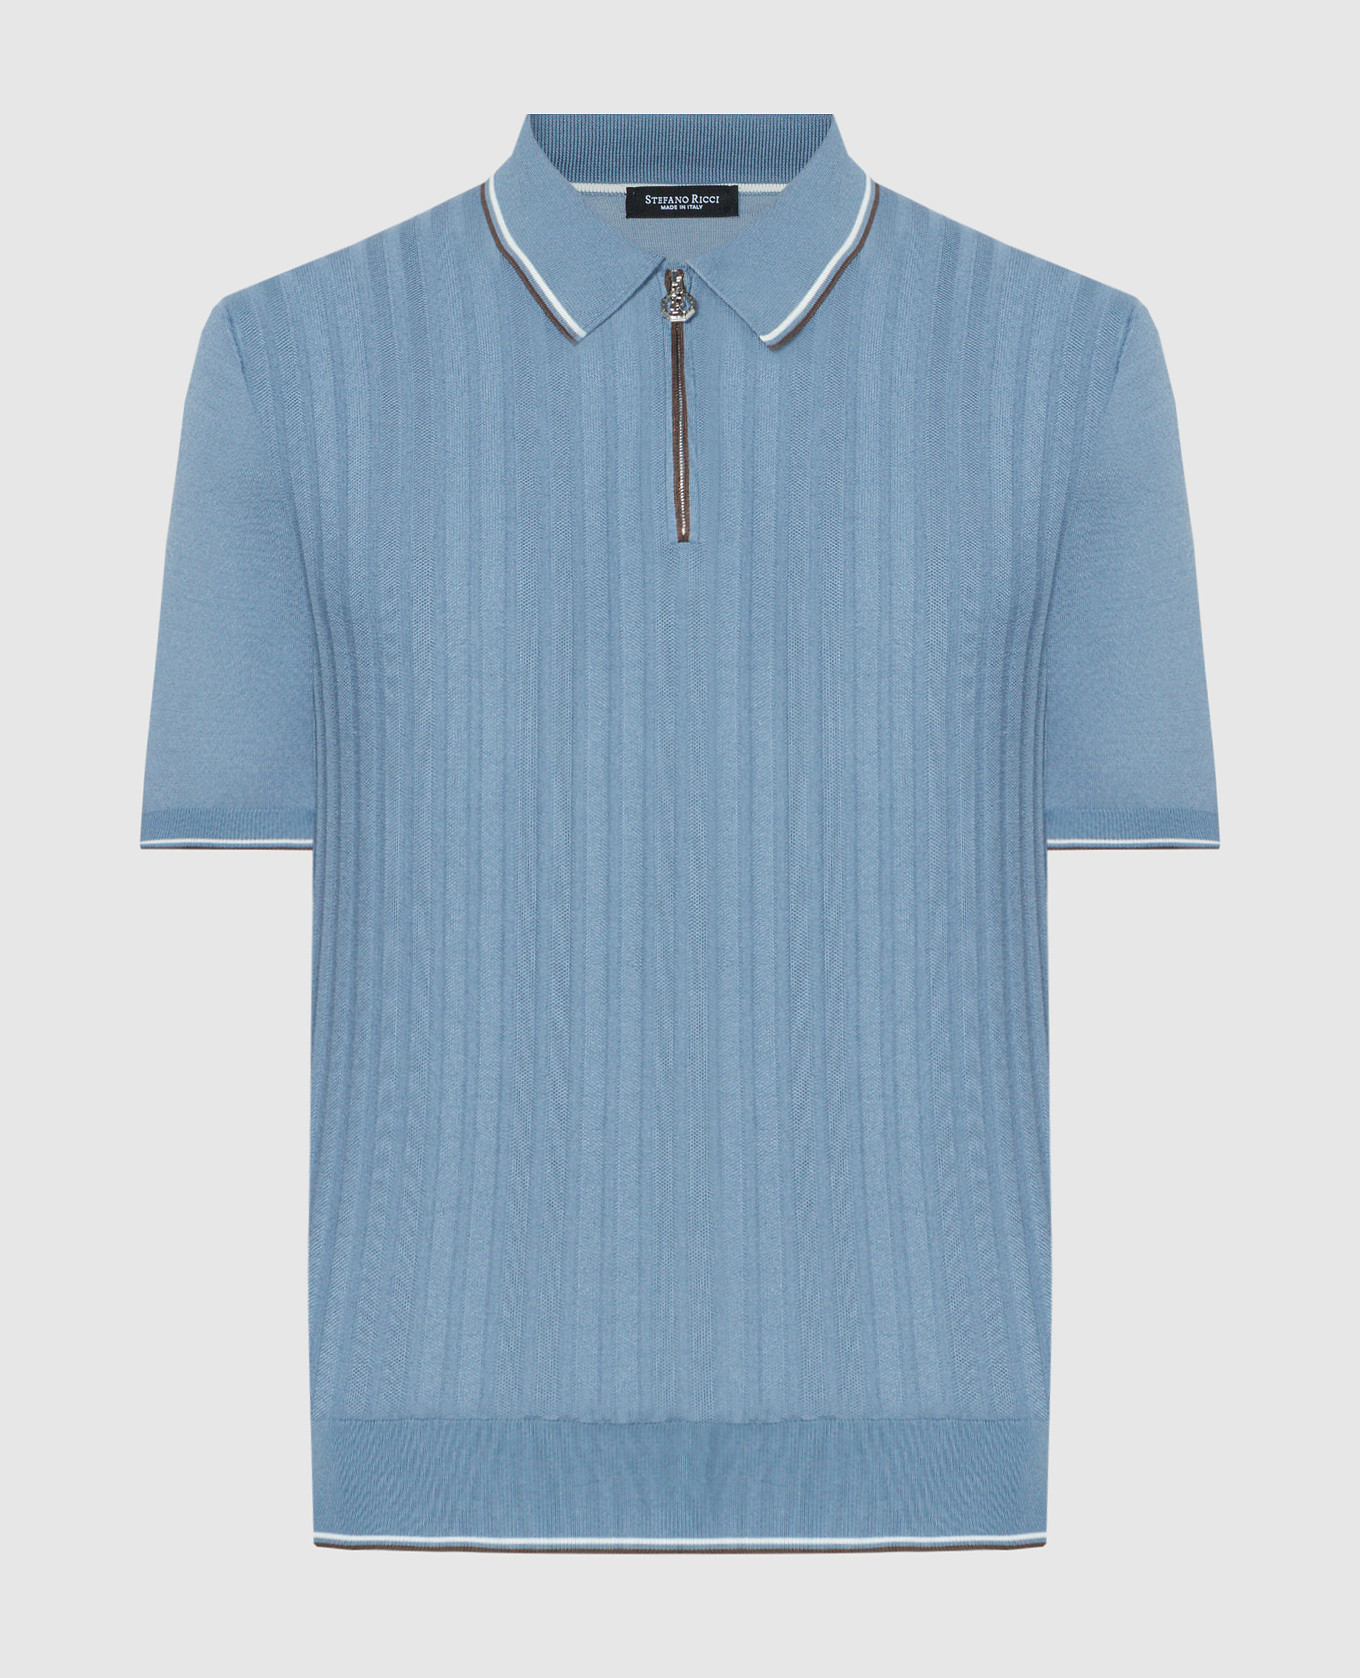 Blue polo shirt with textured pattern